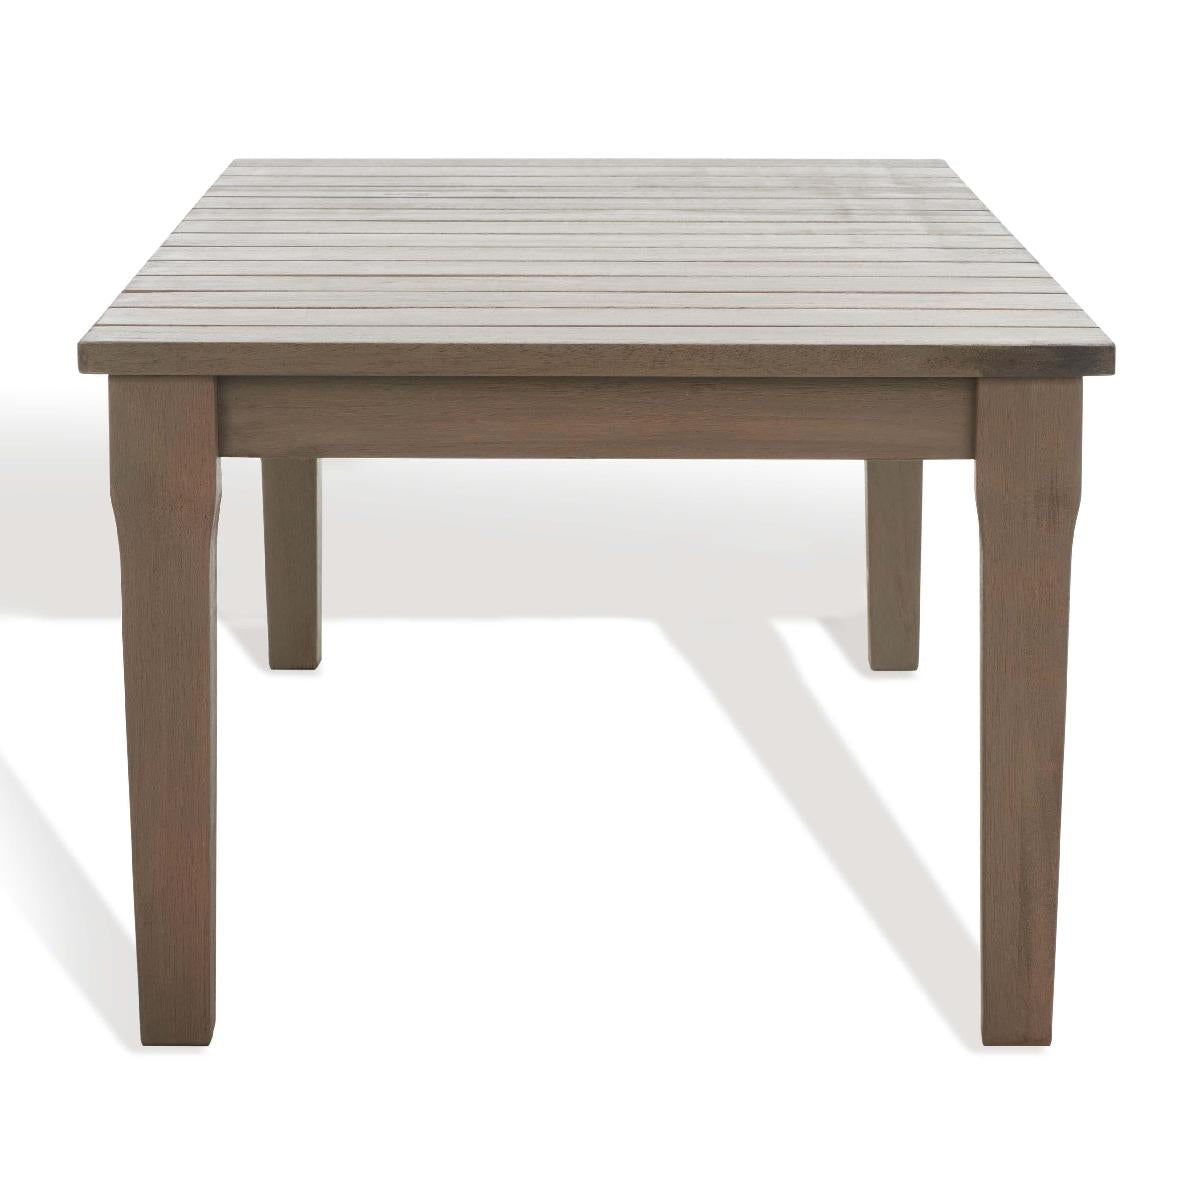 Safavieh Couture Martinique Wood Patio Coffee Table - Light Grey